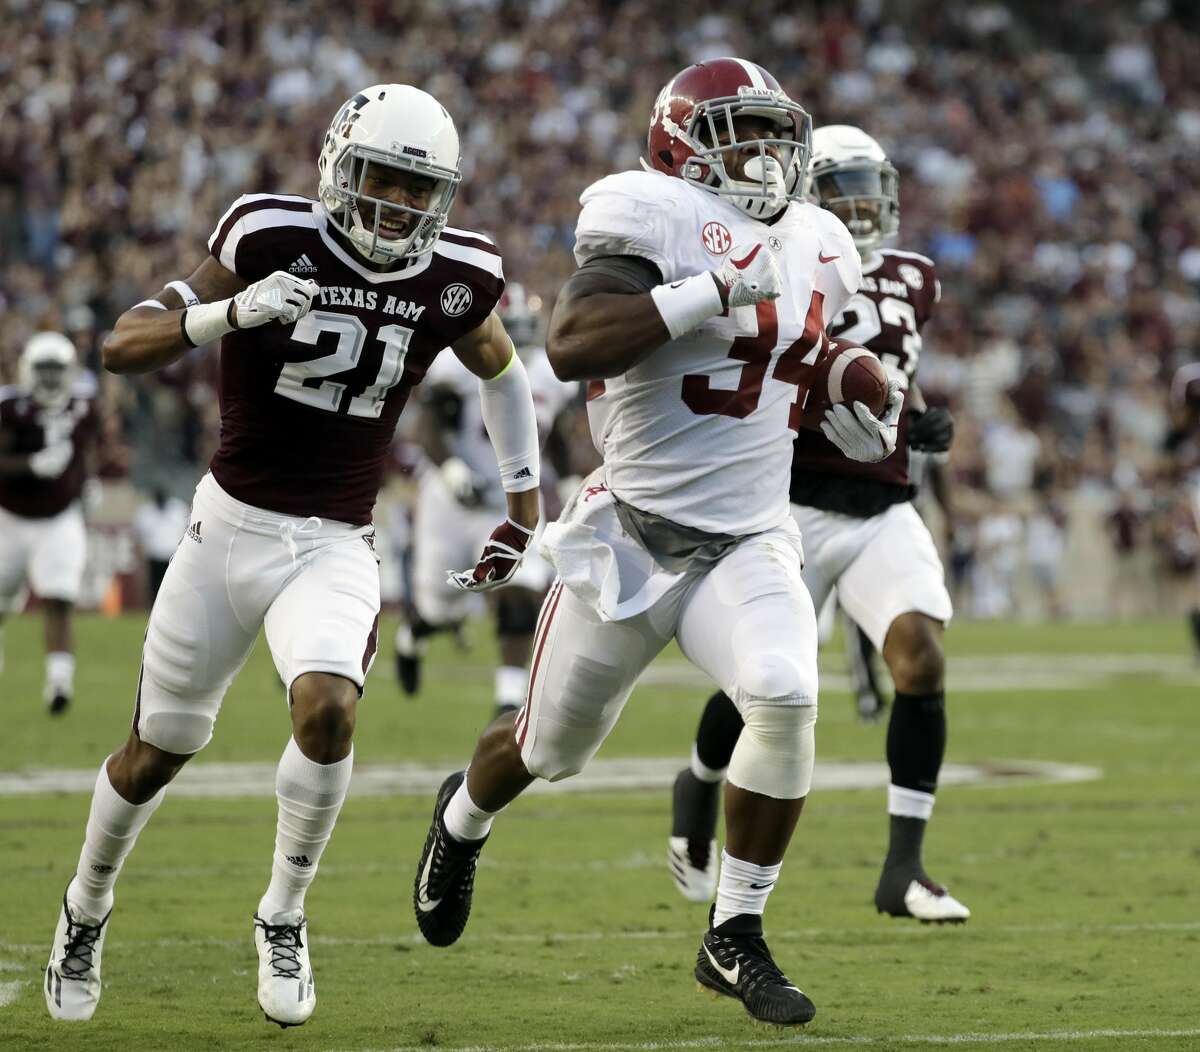 Alabama running back Damien Harris (34) runs for a 75-yard touchdown as Texas A&M's Charles Oliver (21) and Armani Watts (23) pursue during the first quarter of an NCAA college football game Saturday, Oct. 7, 2017, in College Station, Texas. (AP Photo/David J. Phillip)